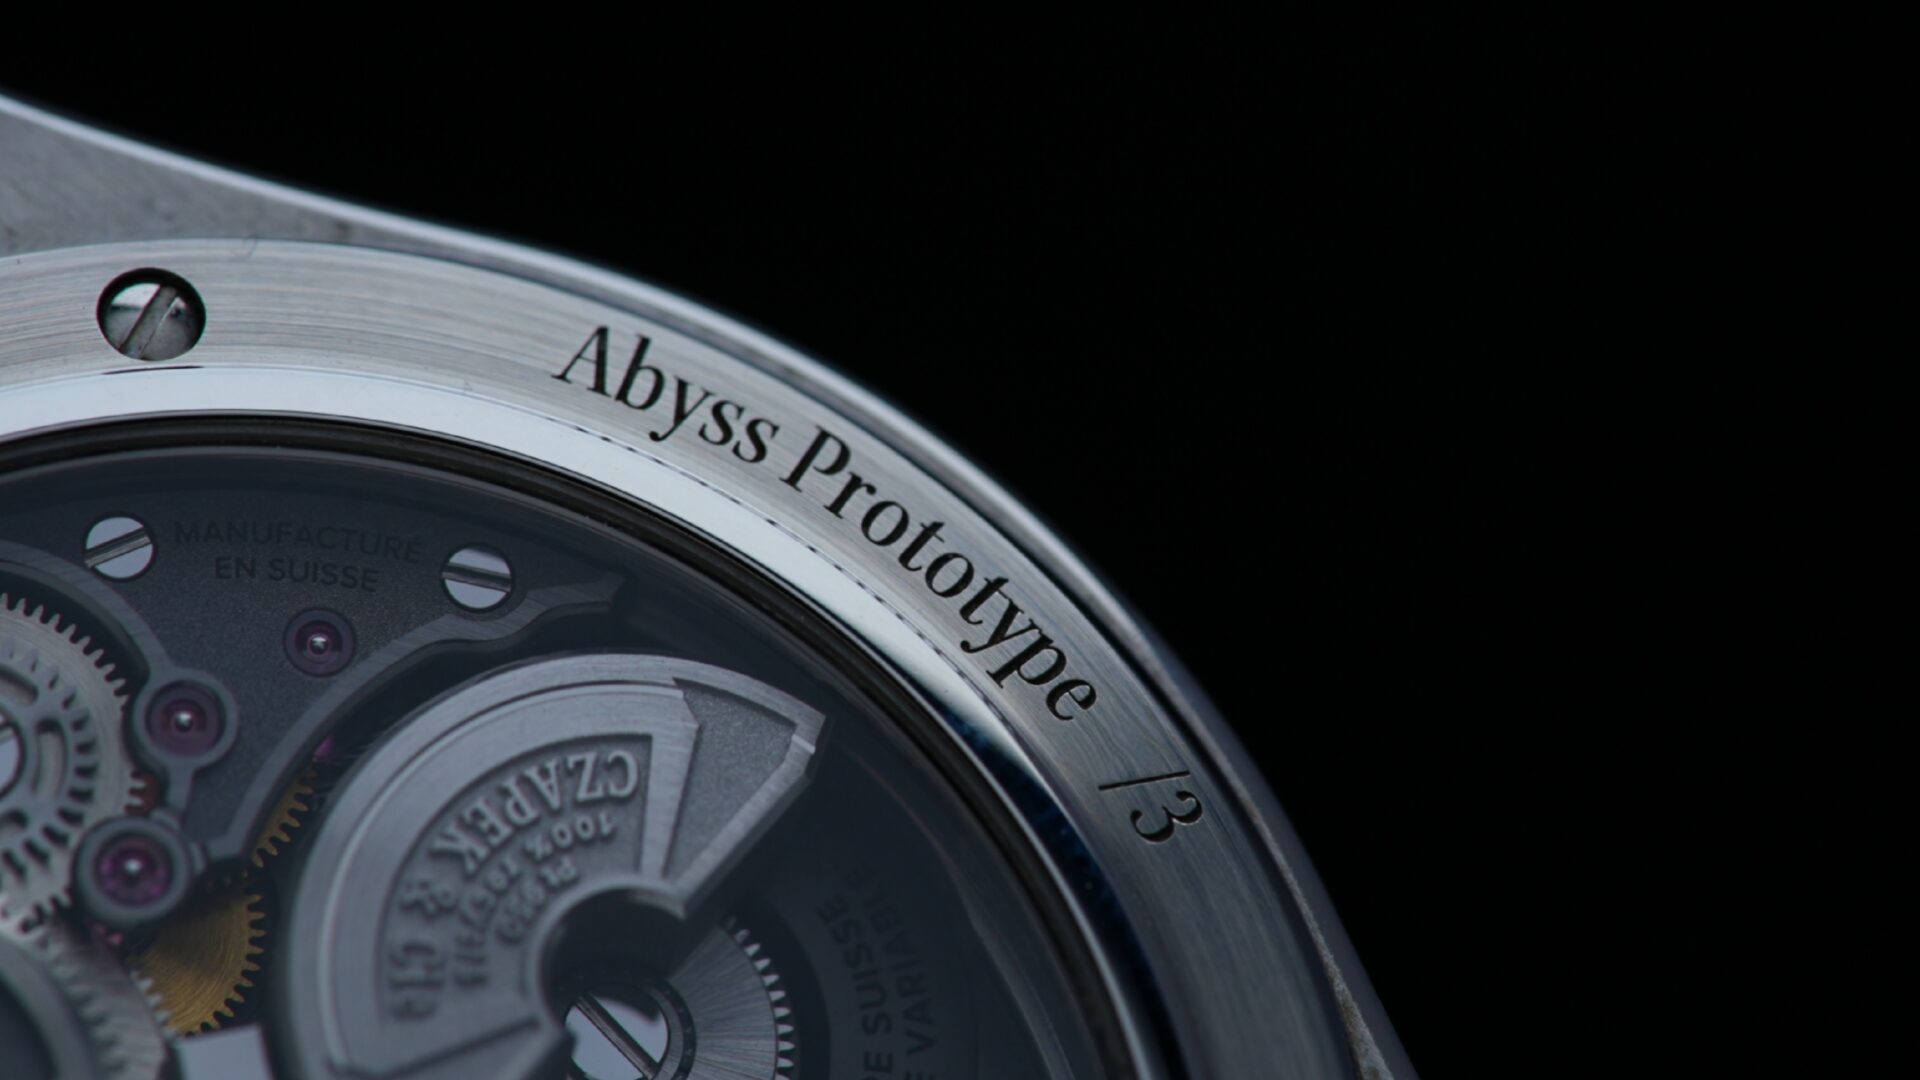 Back side of case of the Antarctique Abyss PROTOTYPE watch.